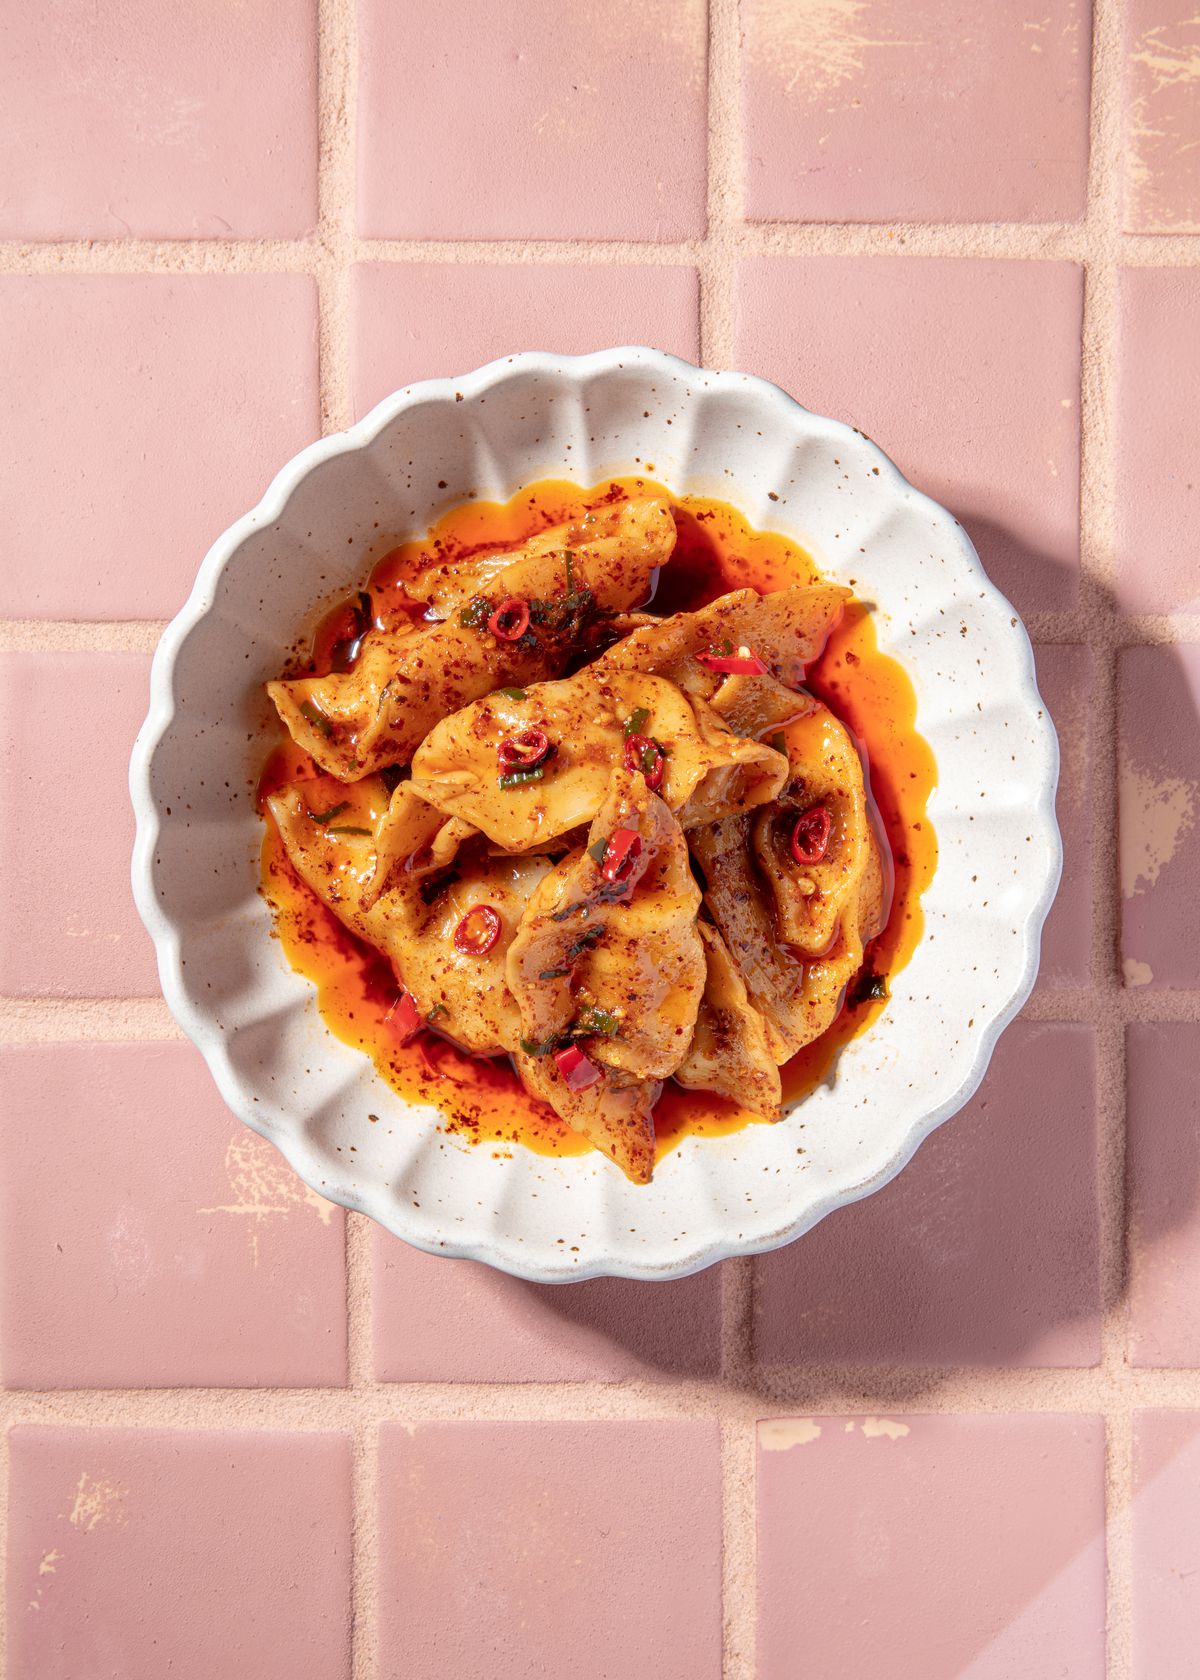 wontons swimming in chili oil in a white dish with a scalloped edge on a pink tile background.